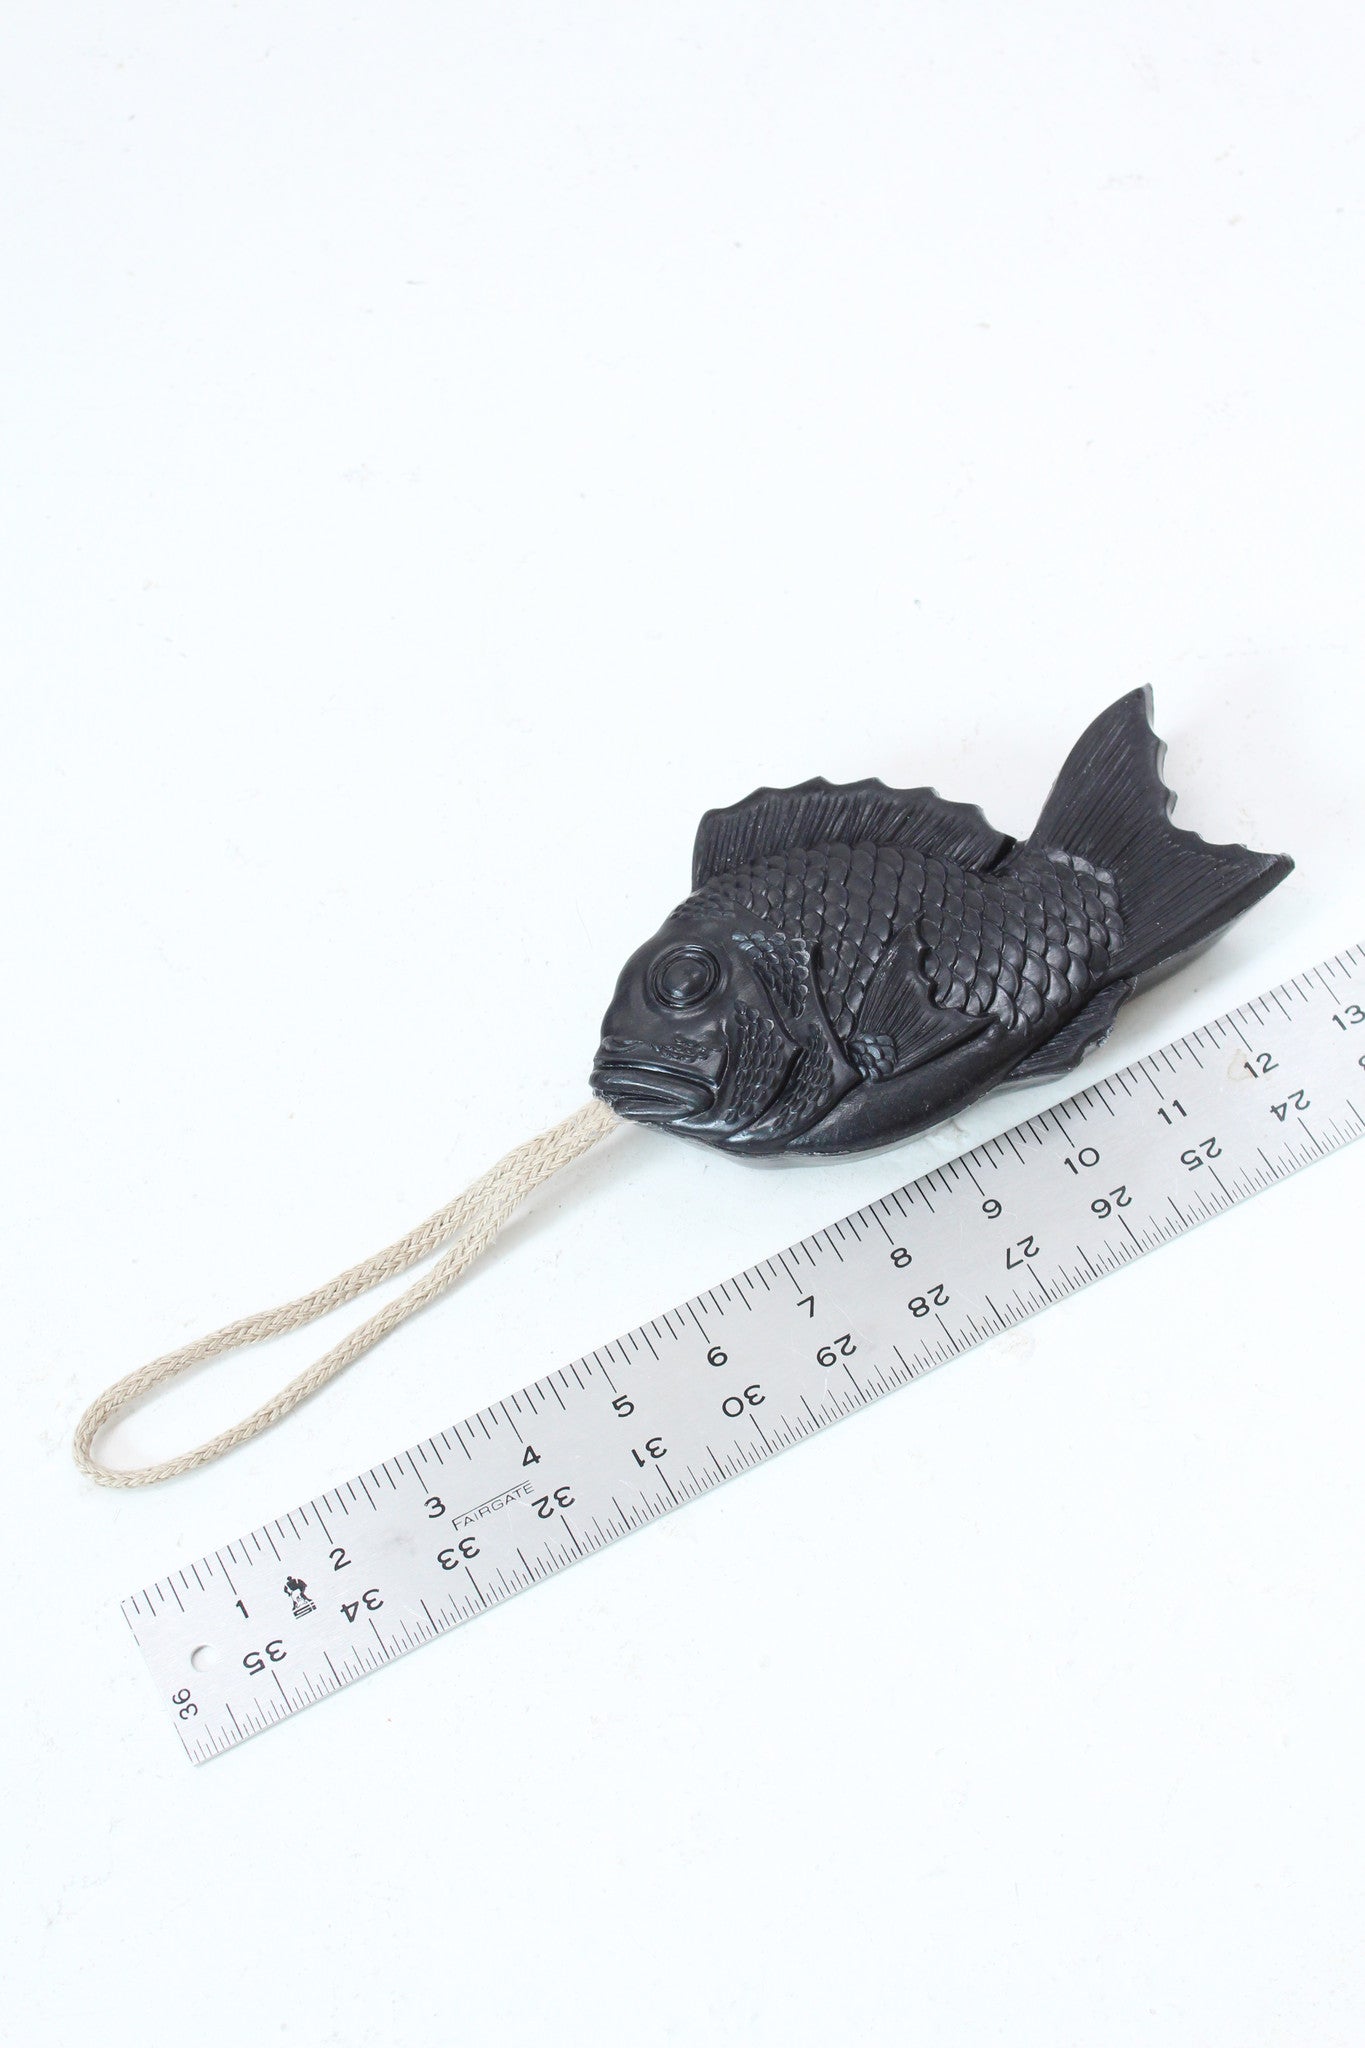 Fish- soap on a rope!